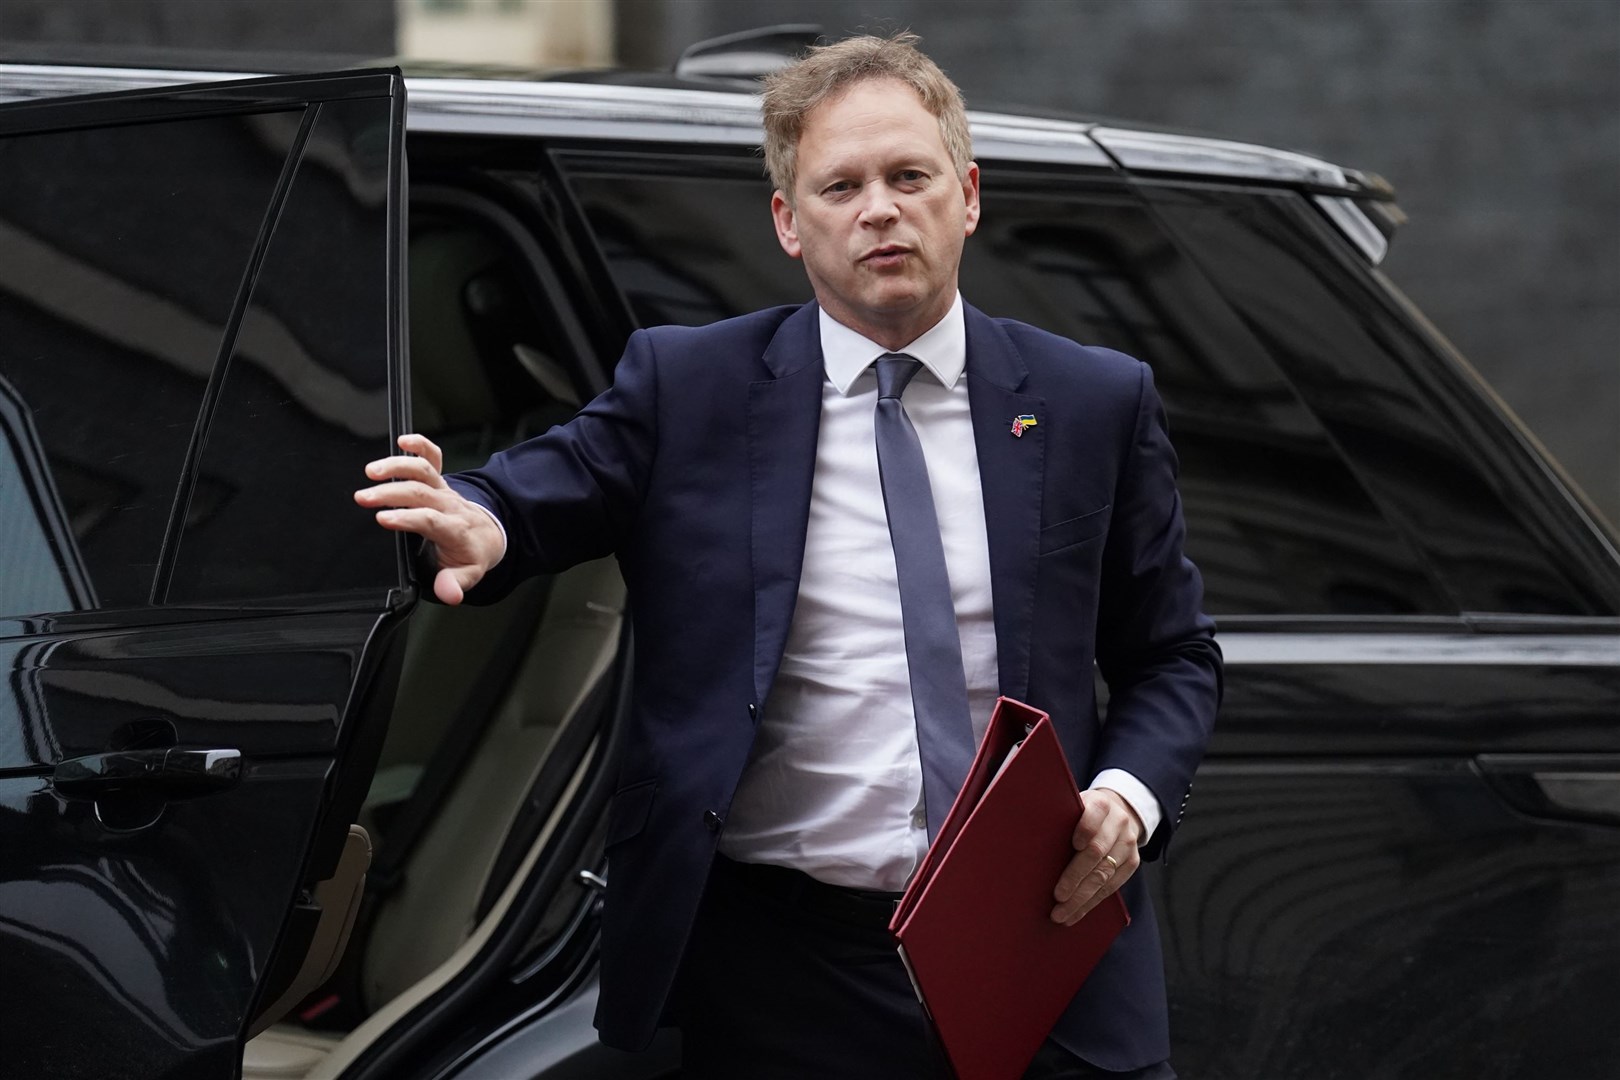 Business Secretary Grant Shapps has proposed new laws to require minimum service levels during strikes. (Stefan Rousseau/PA)